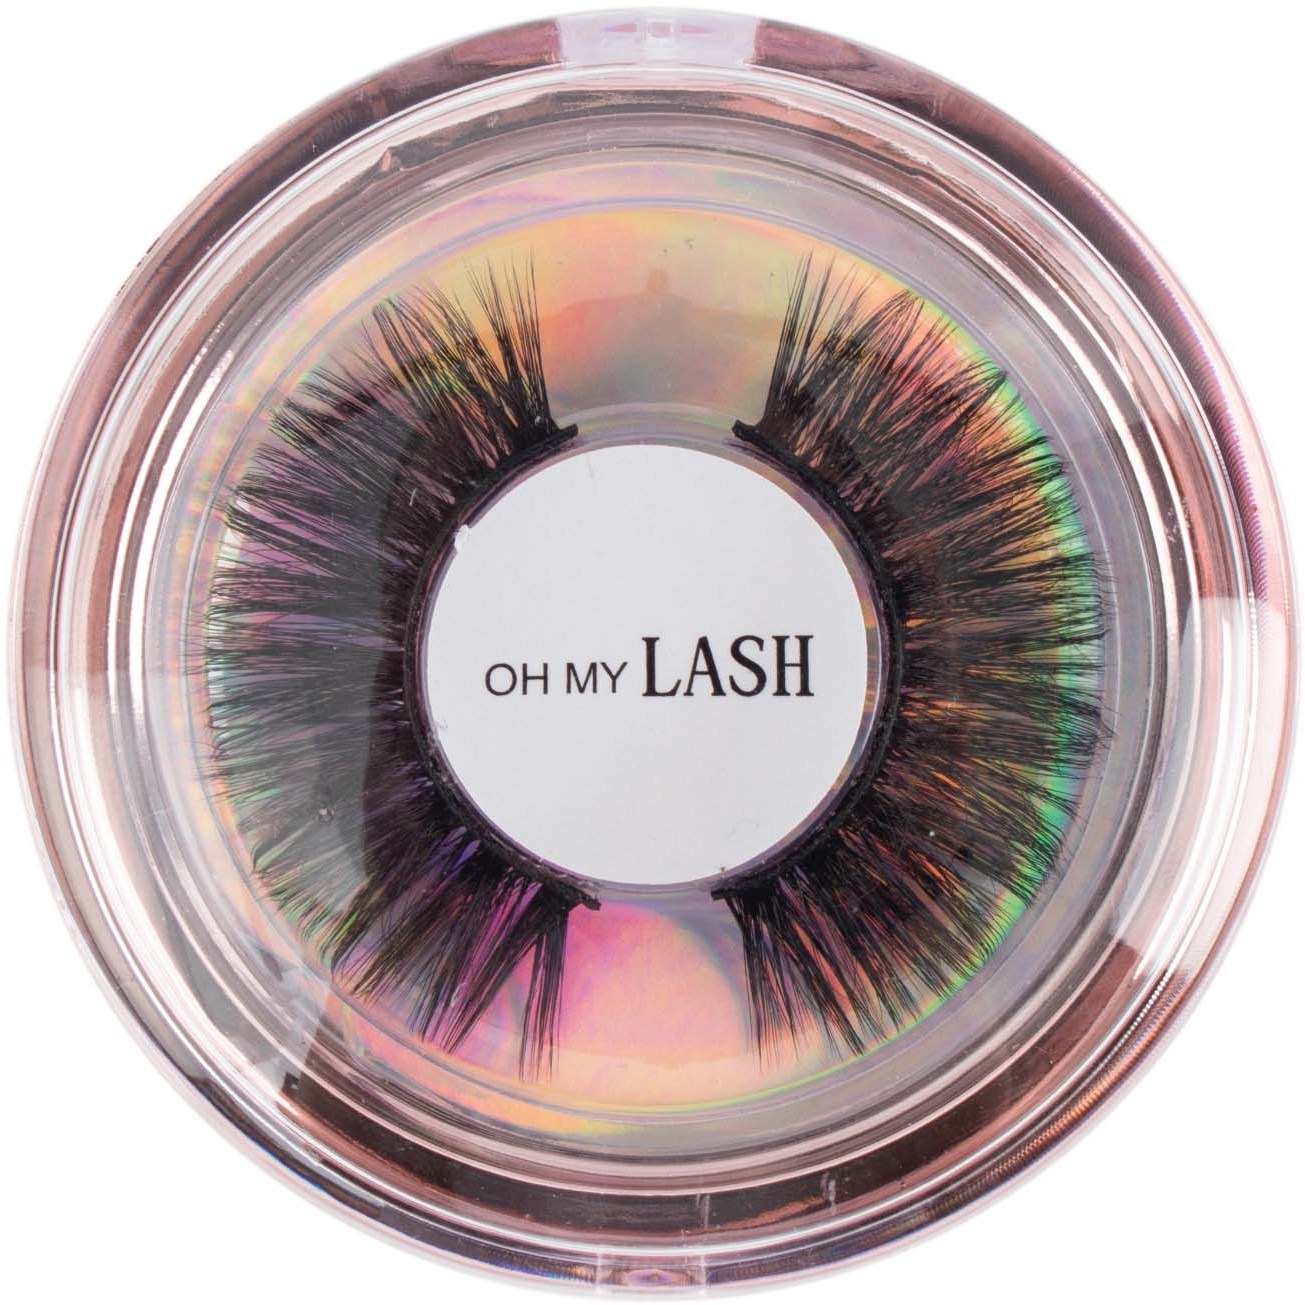 Oh My Lash Faux Mink Strip Lashes Filter (Plastic Re-Useable Case